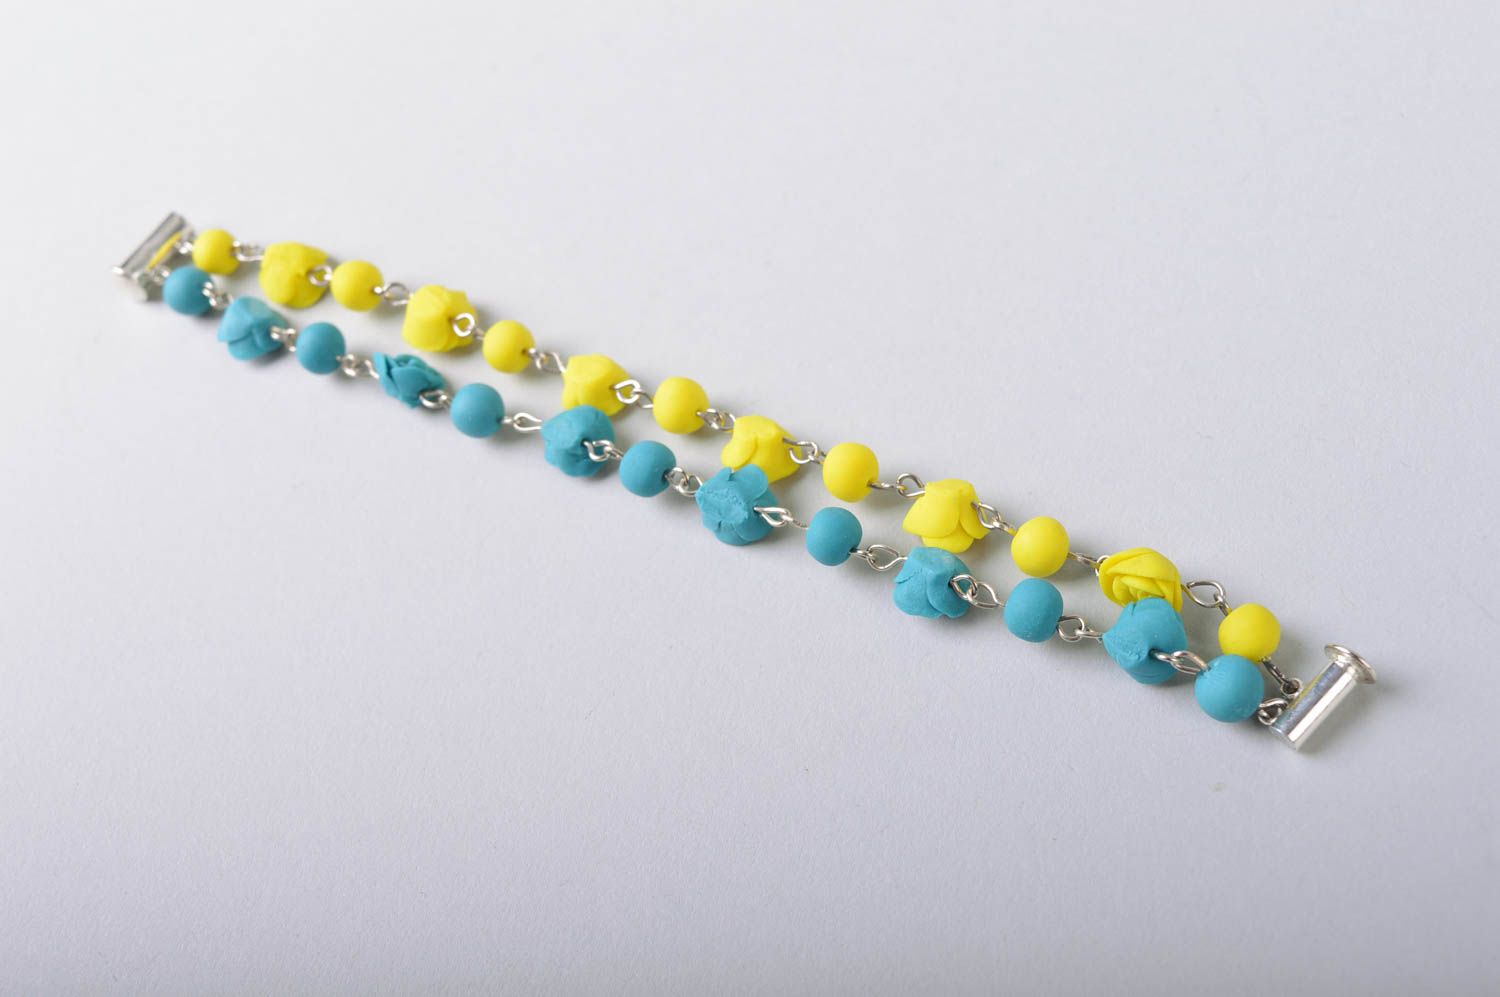 Handmade bright wrist bracelet with blue and yellow cold porcelain rose flowers photo 5